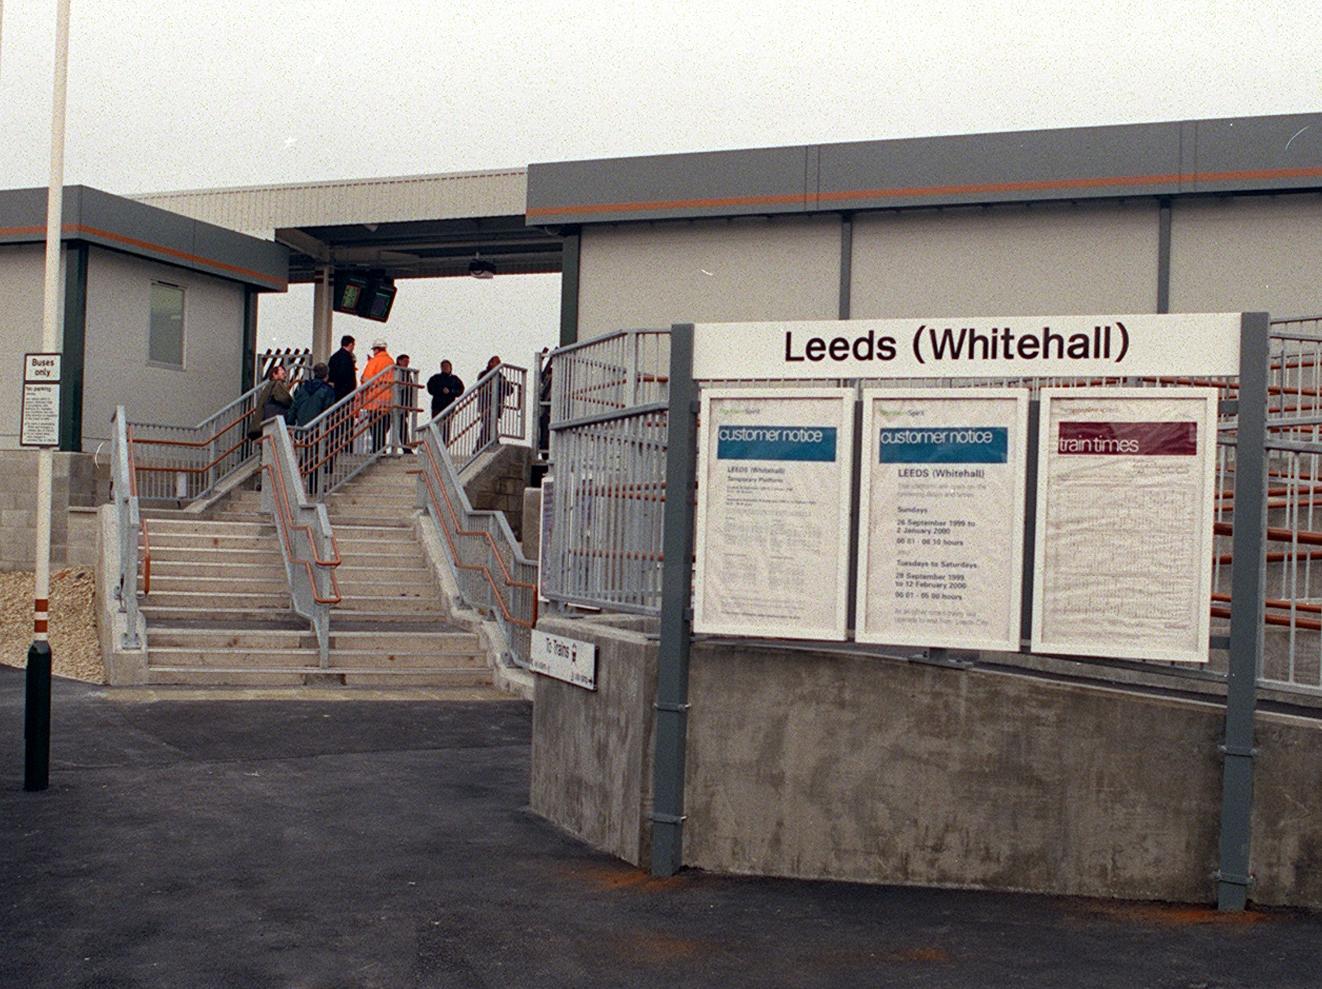 Temporary railway station Leeds Whitehall was built to handle some services while Leeds City Station was being remodelled.